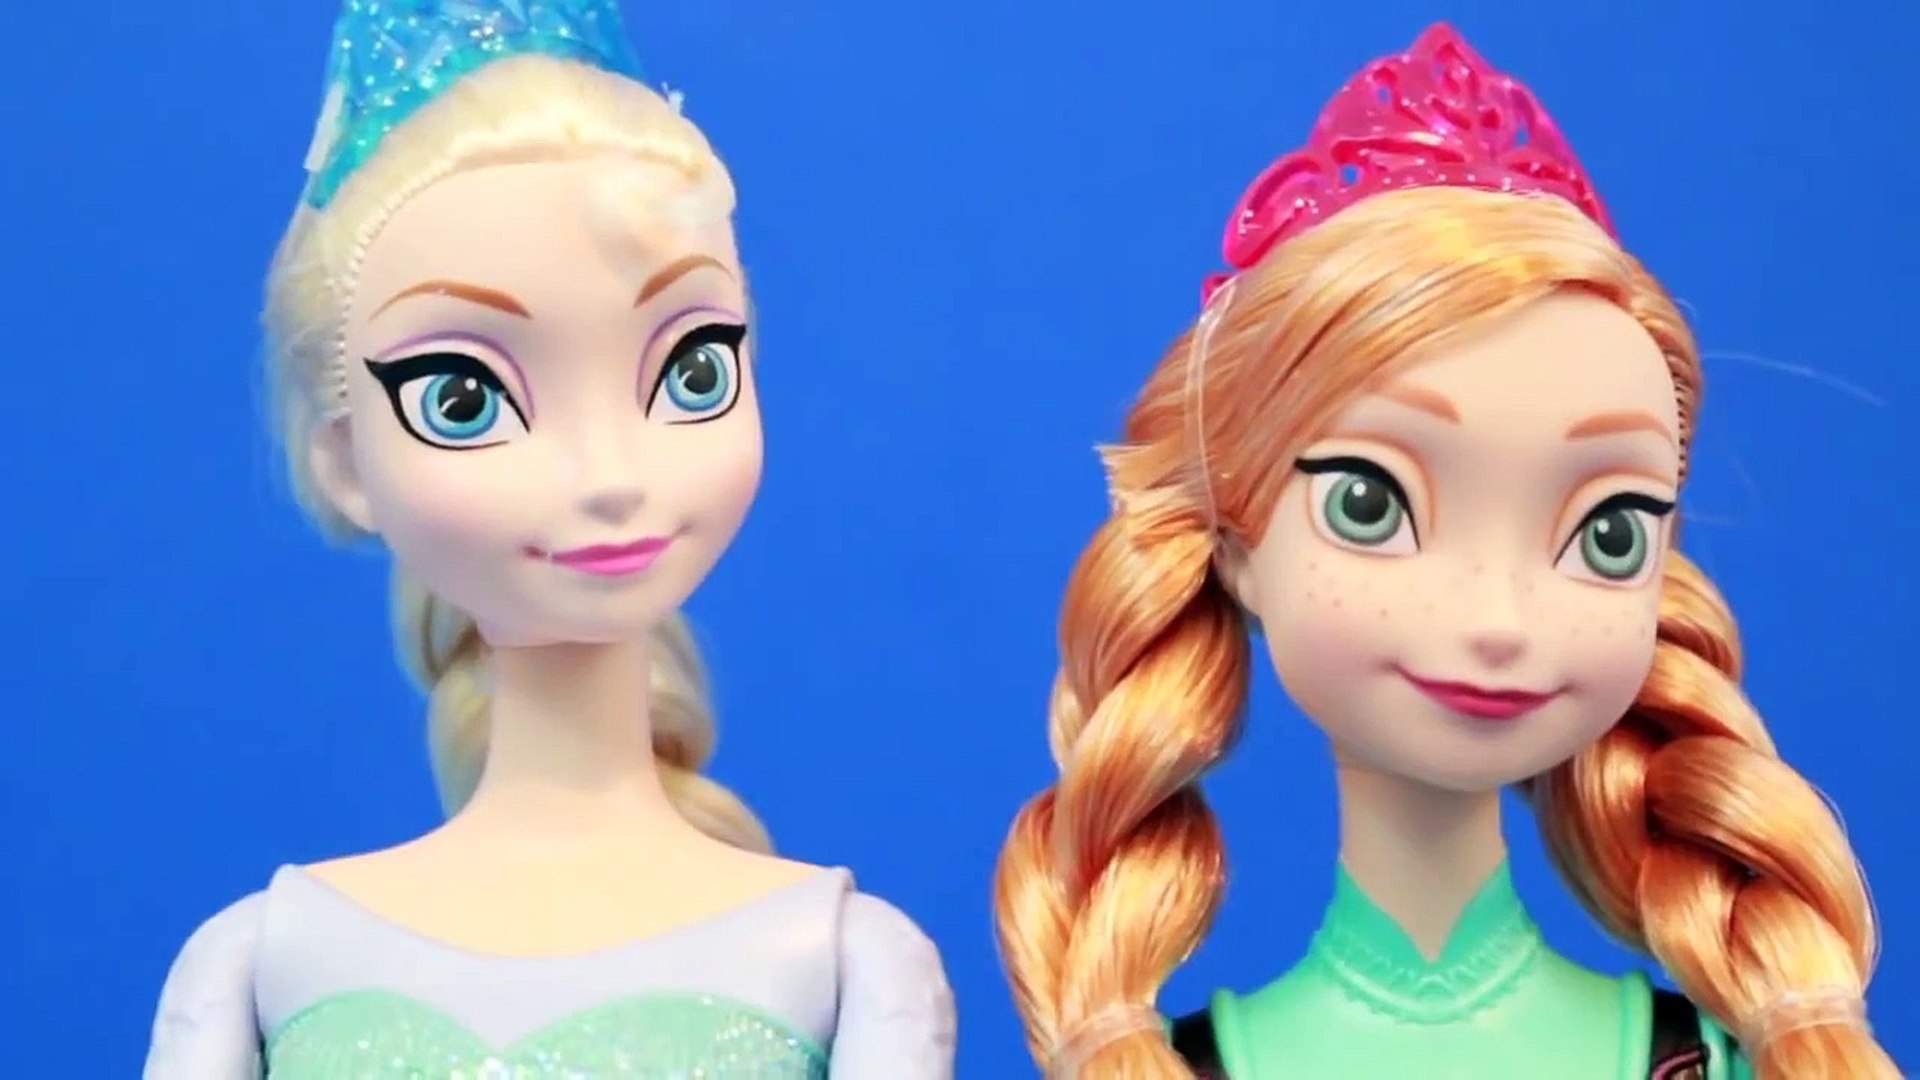 Frozen Friends Family Collection Disney Barbie WAL-MART Exclusive Anna Elsa  Olaf Sven MATTEL TOYS - Dailymotion Video